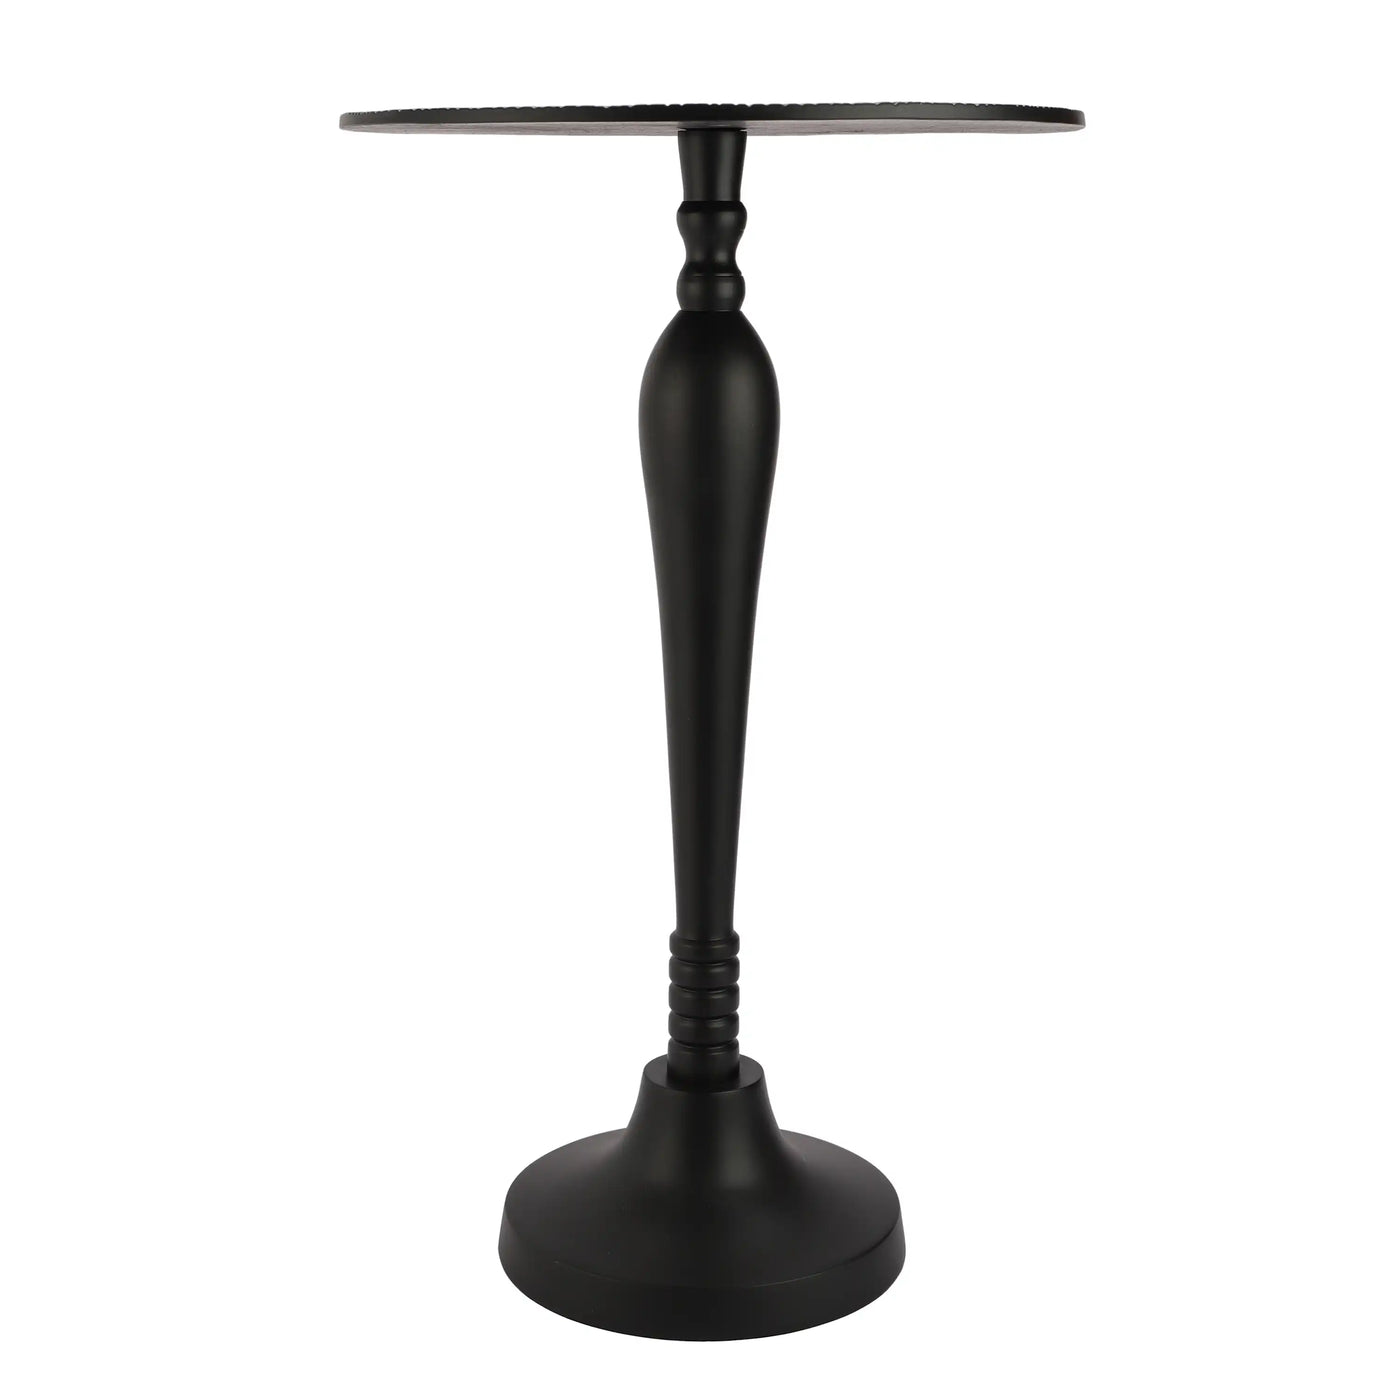 The Carla Side Table in Classical design in Raw Black Finish 61-177-48-3